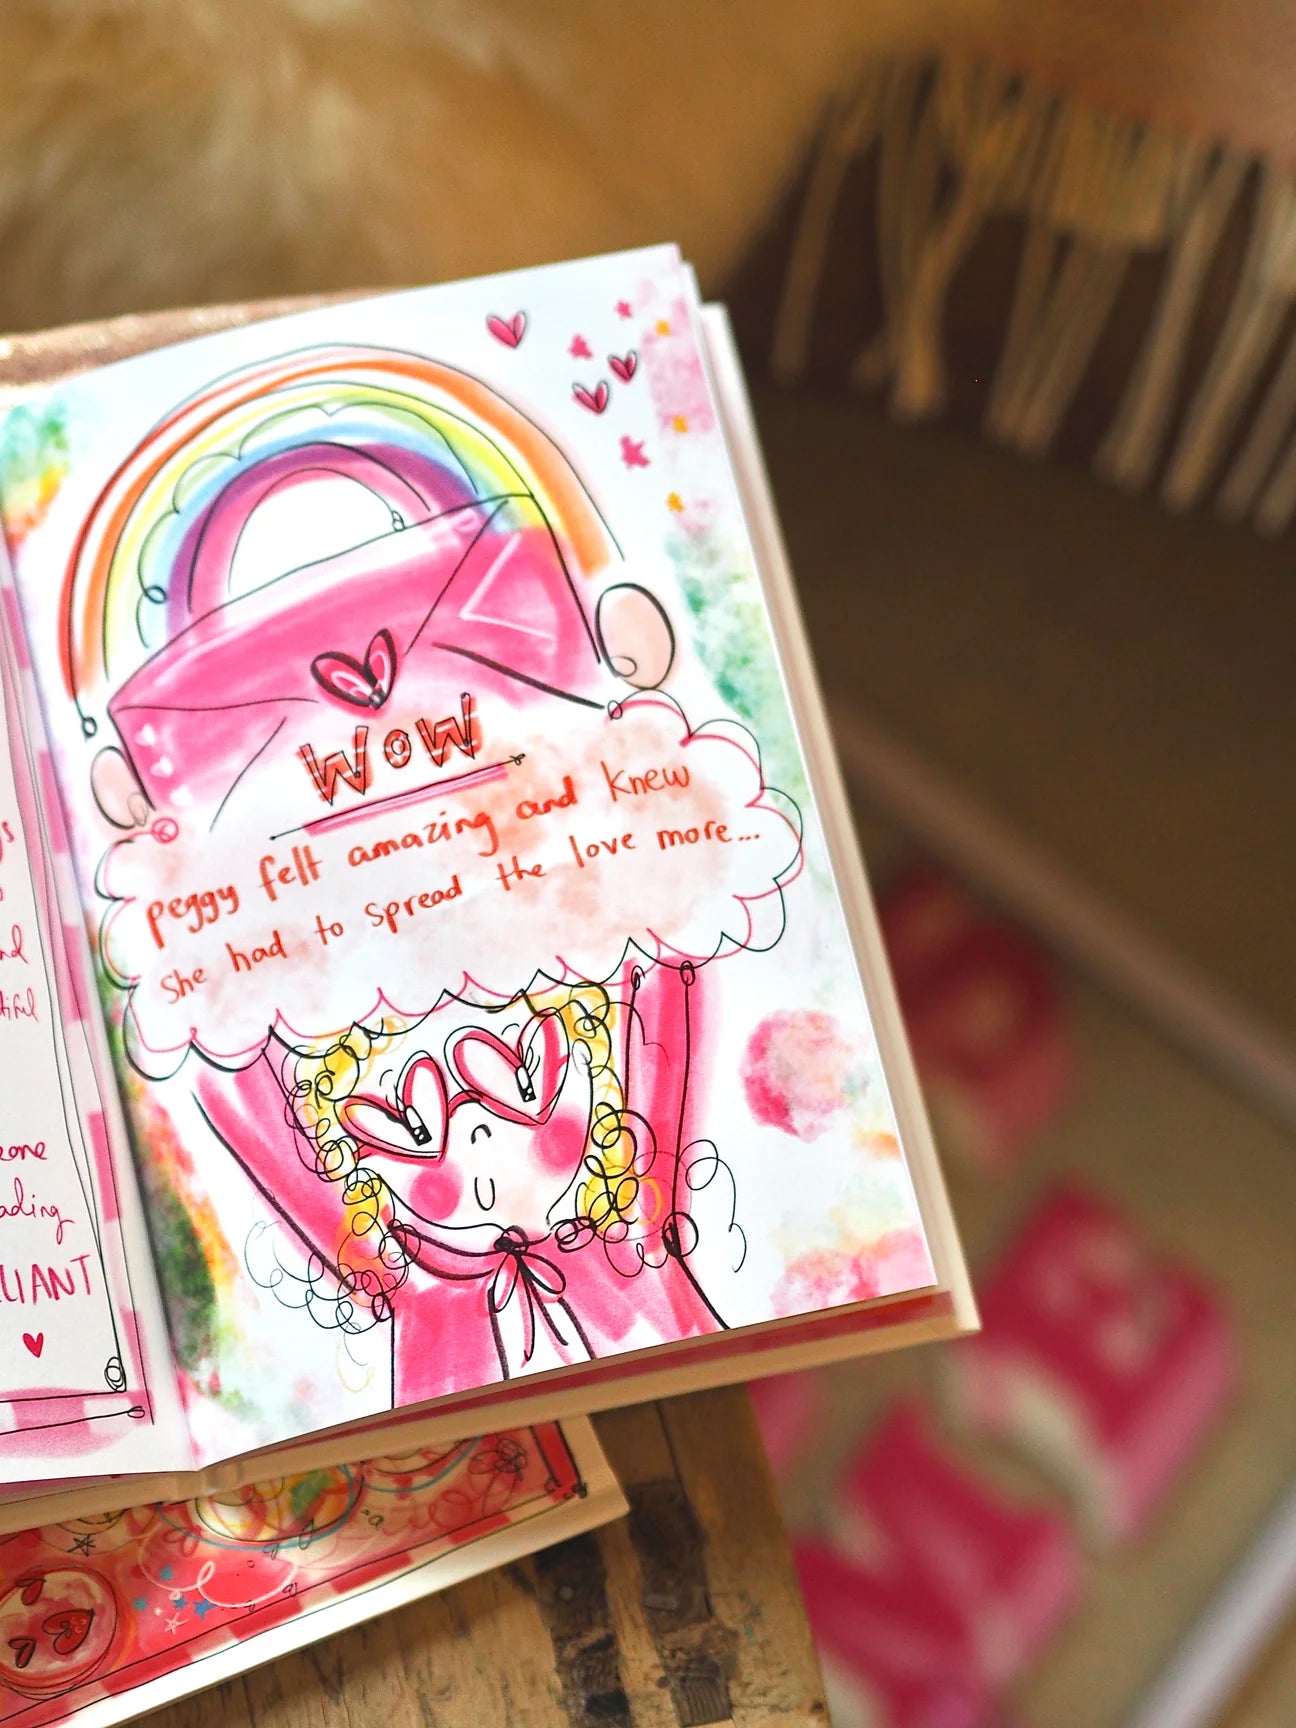 ‘A Very Pink Love Letter’ Children’s Book